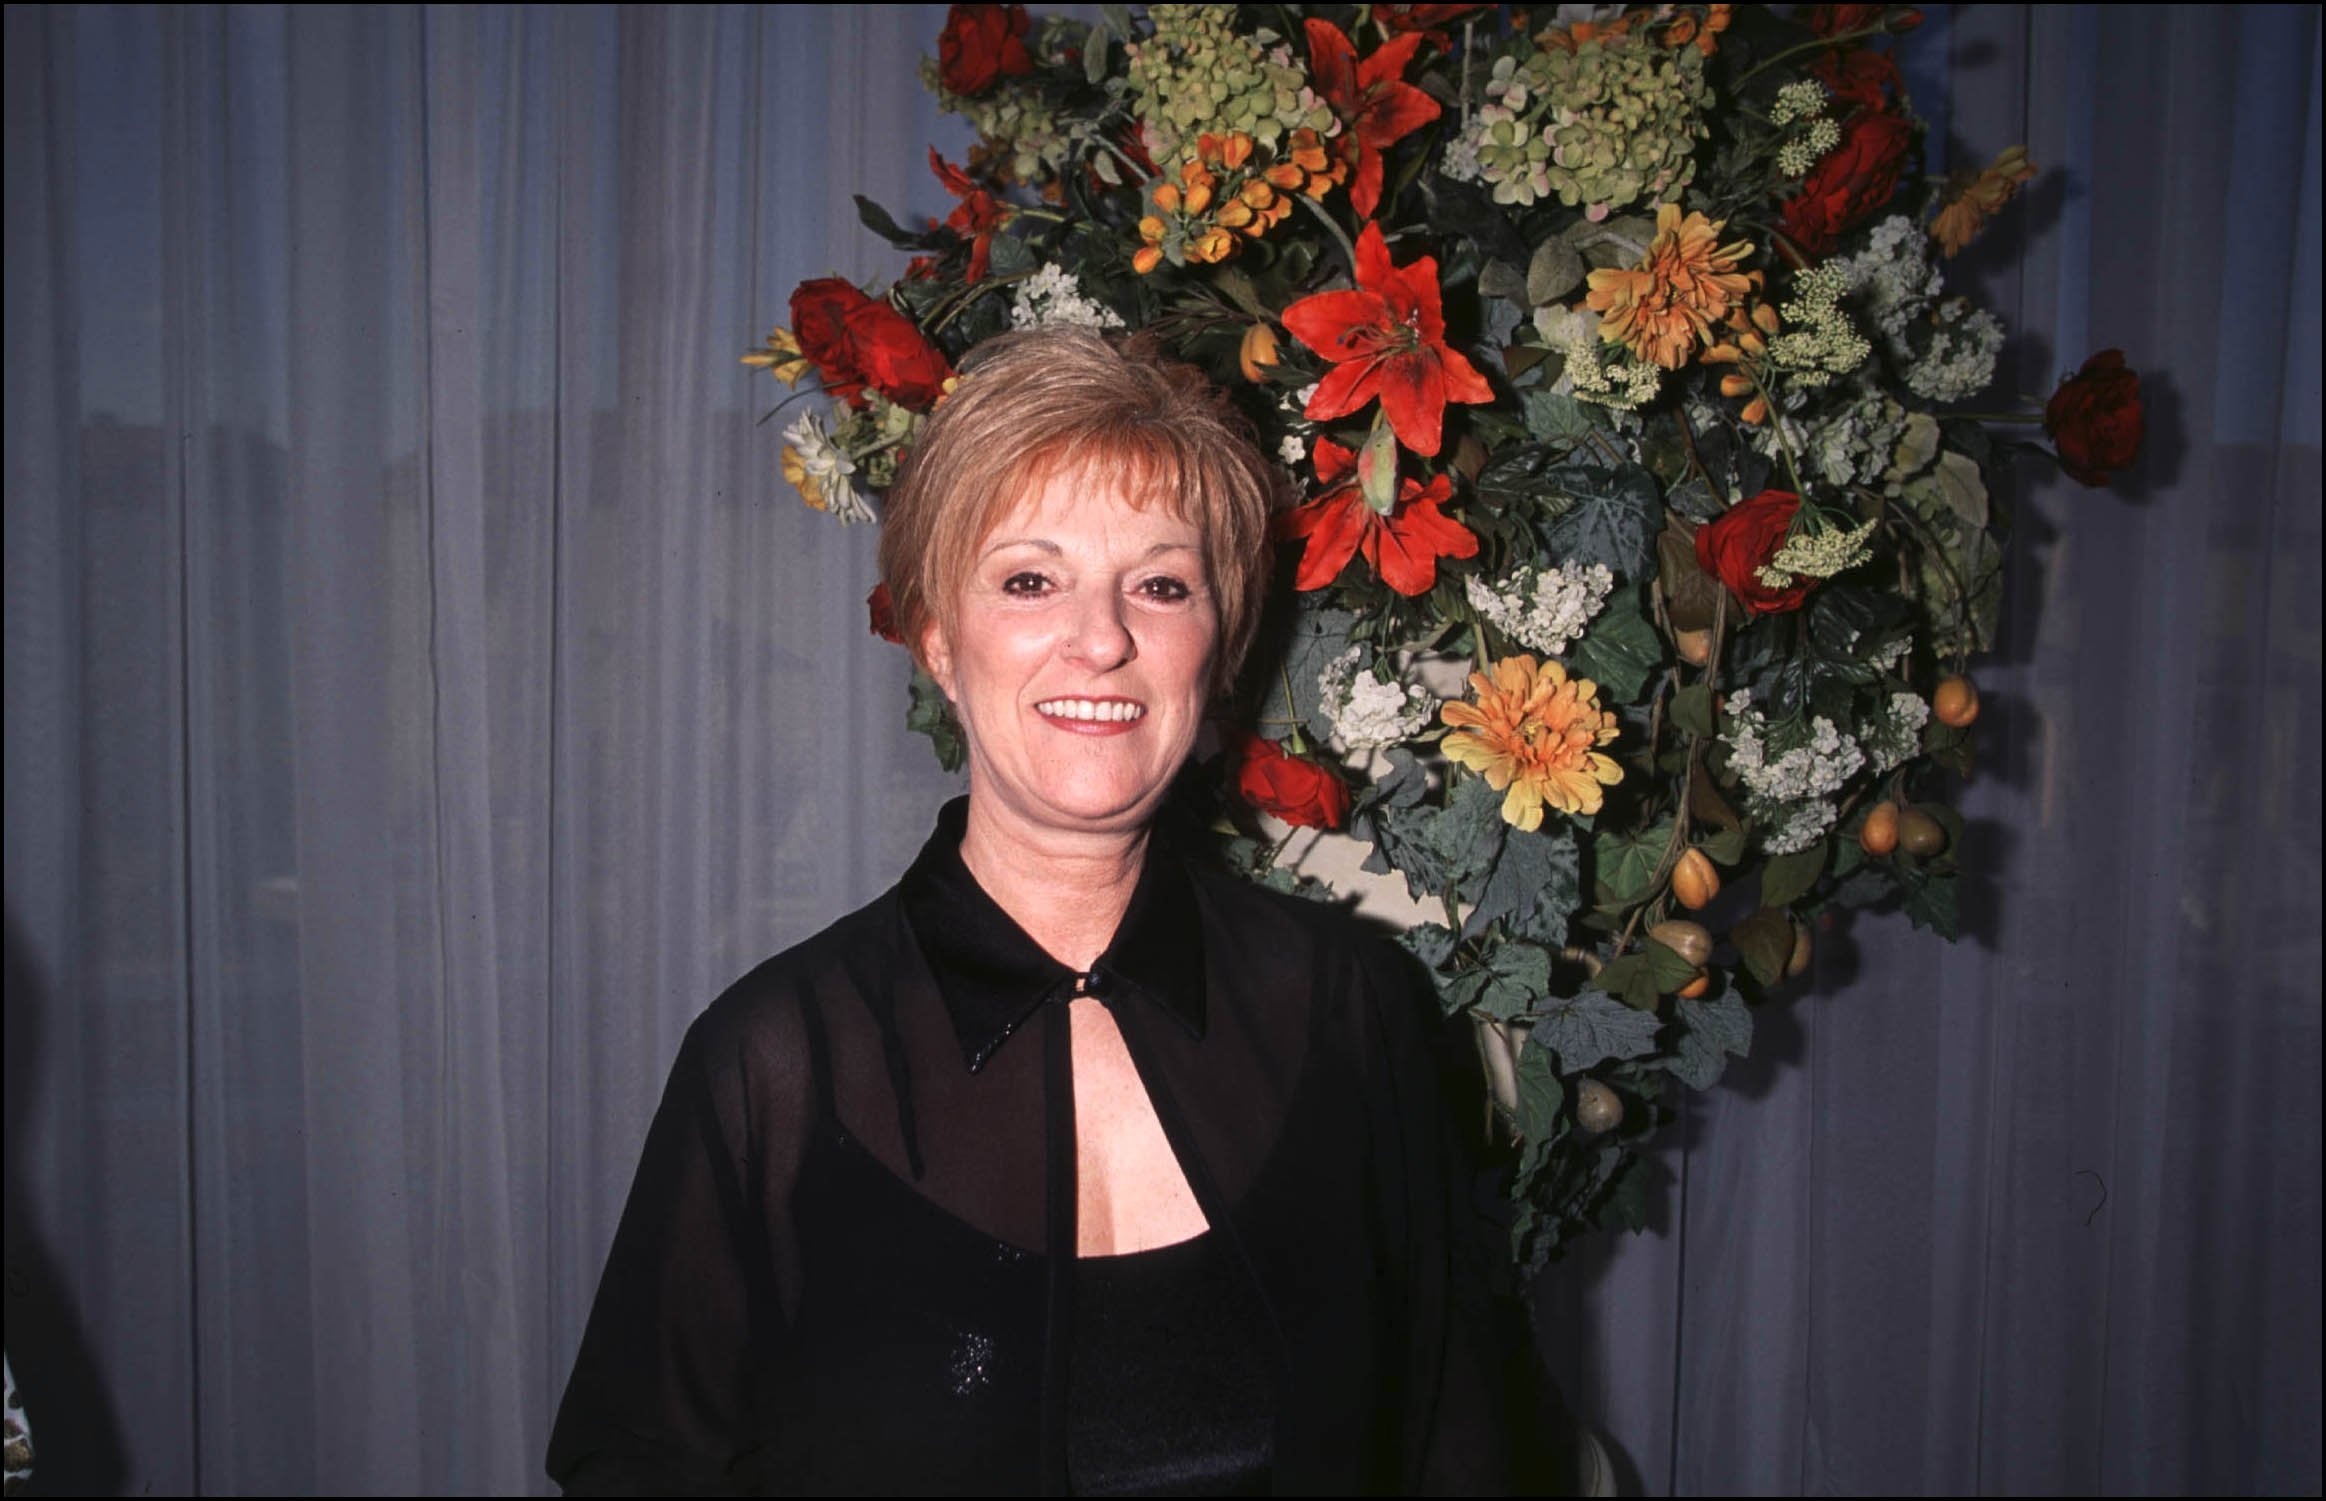 Claudette Dion at "Maman Dion's" Achille-Tangauy foundation dinner in Canada, 2001 | Source: Getty Images